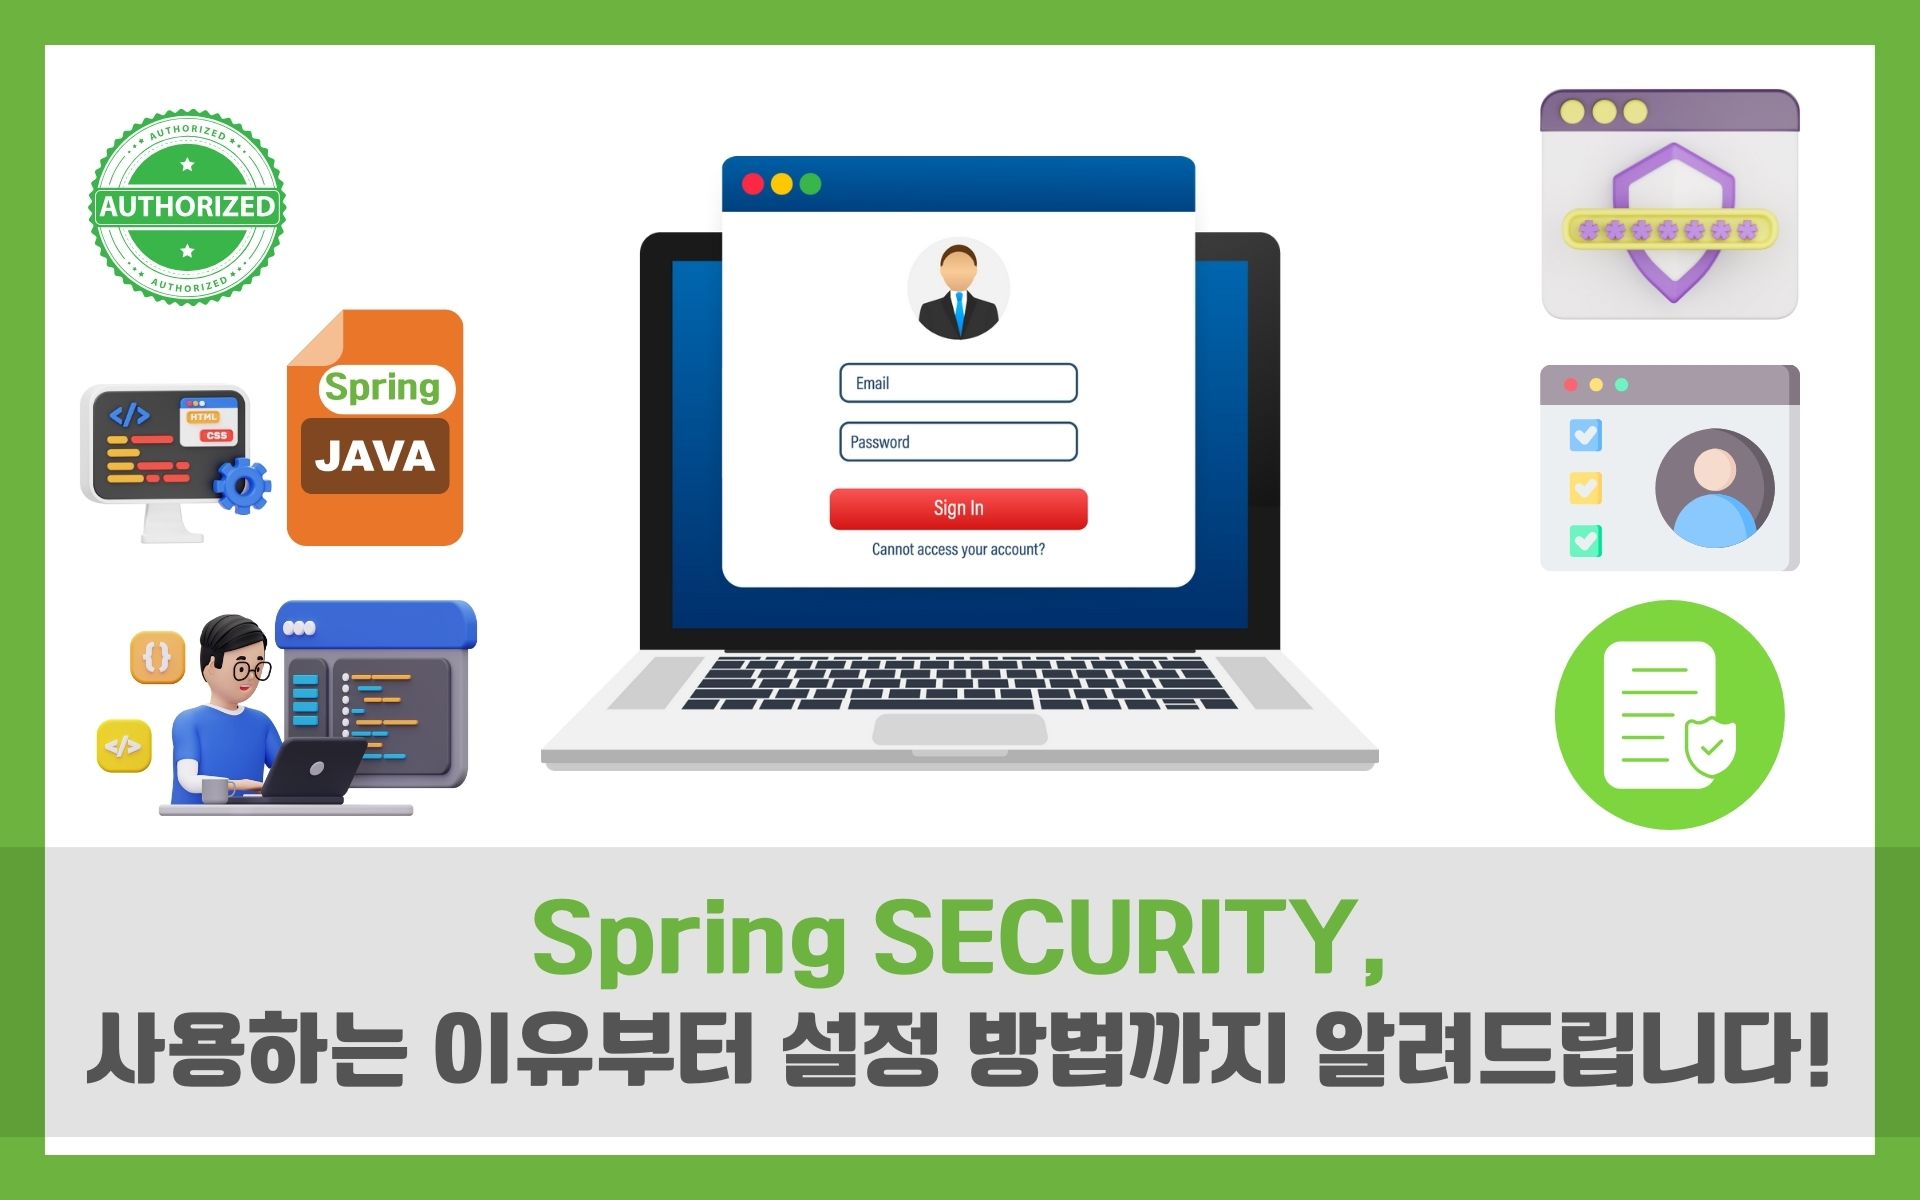 spring-security